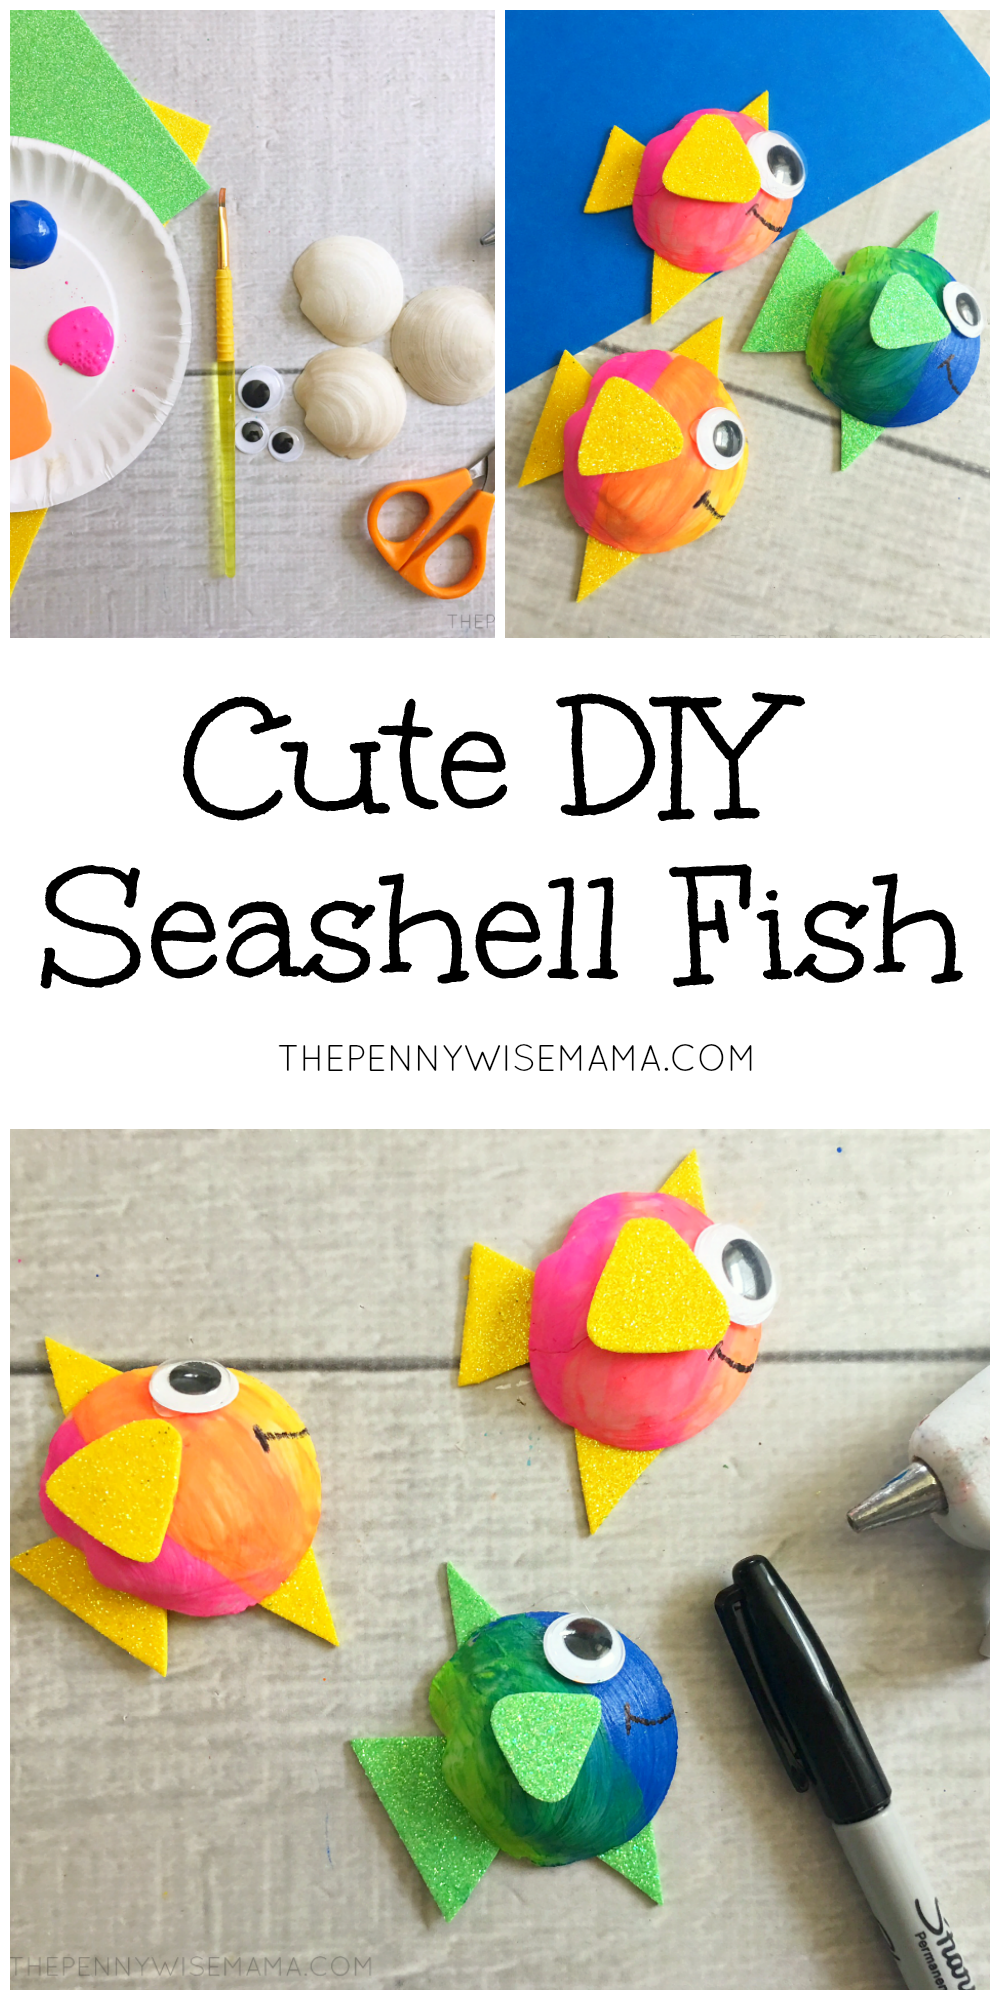 Cute Seashell Fish - simple craft that is great for kids learning about the ocean or sea animals